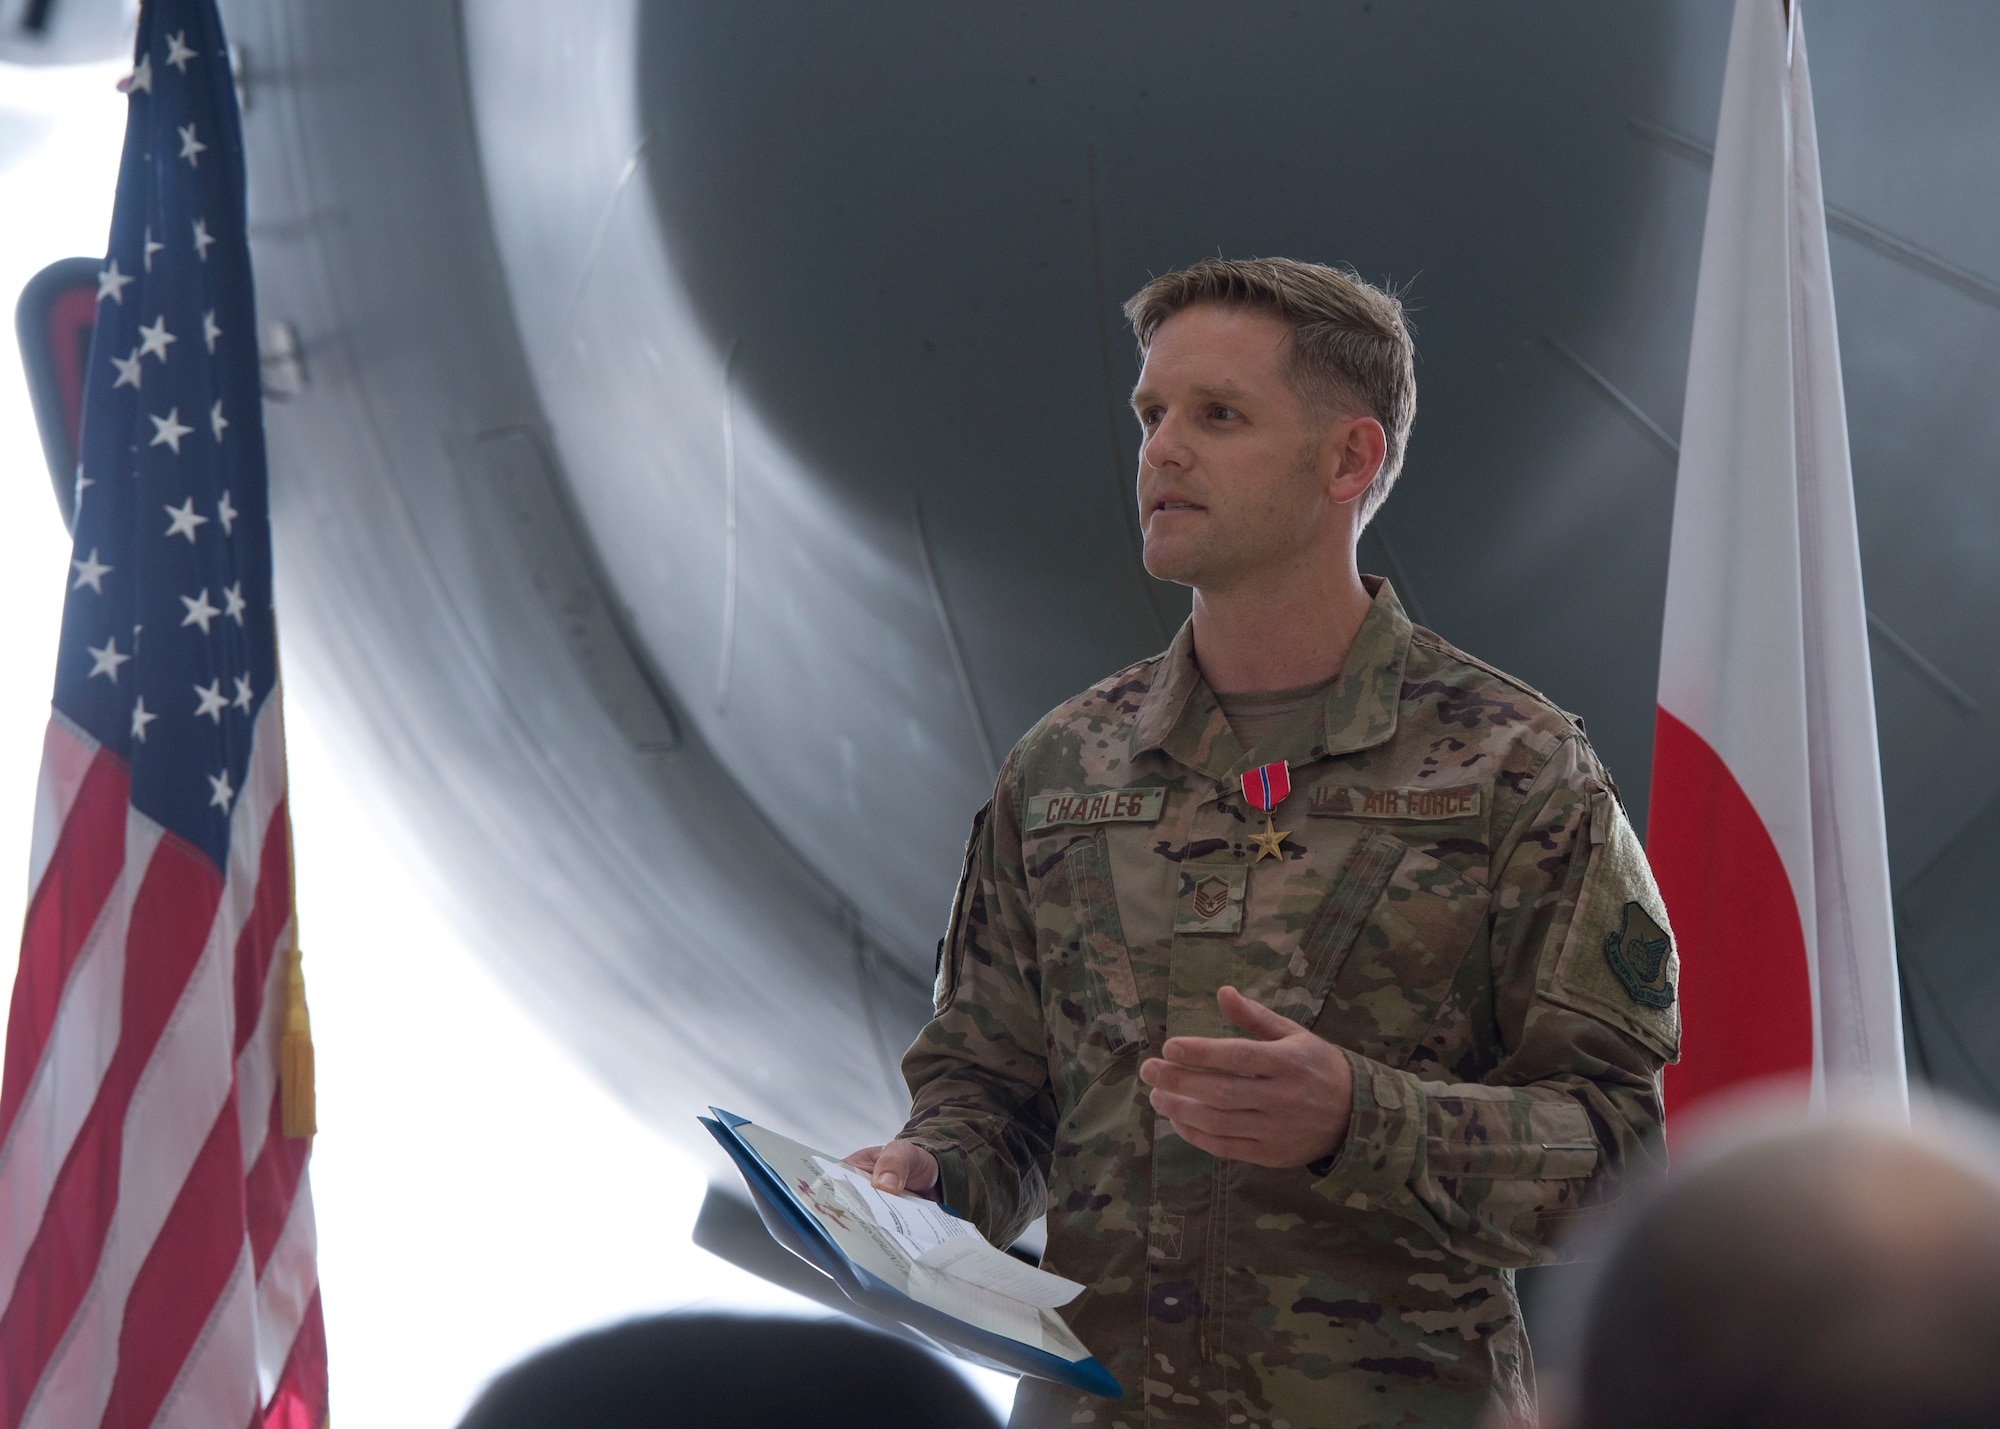 Master Sgt. James Charles, 374th Aircraft Maintenance Squadron production superintendent, speaks about receiving the Bronze Star Medal, during a ceremony held at Yokota Air Base, Japan